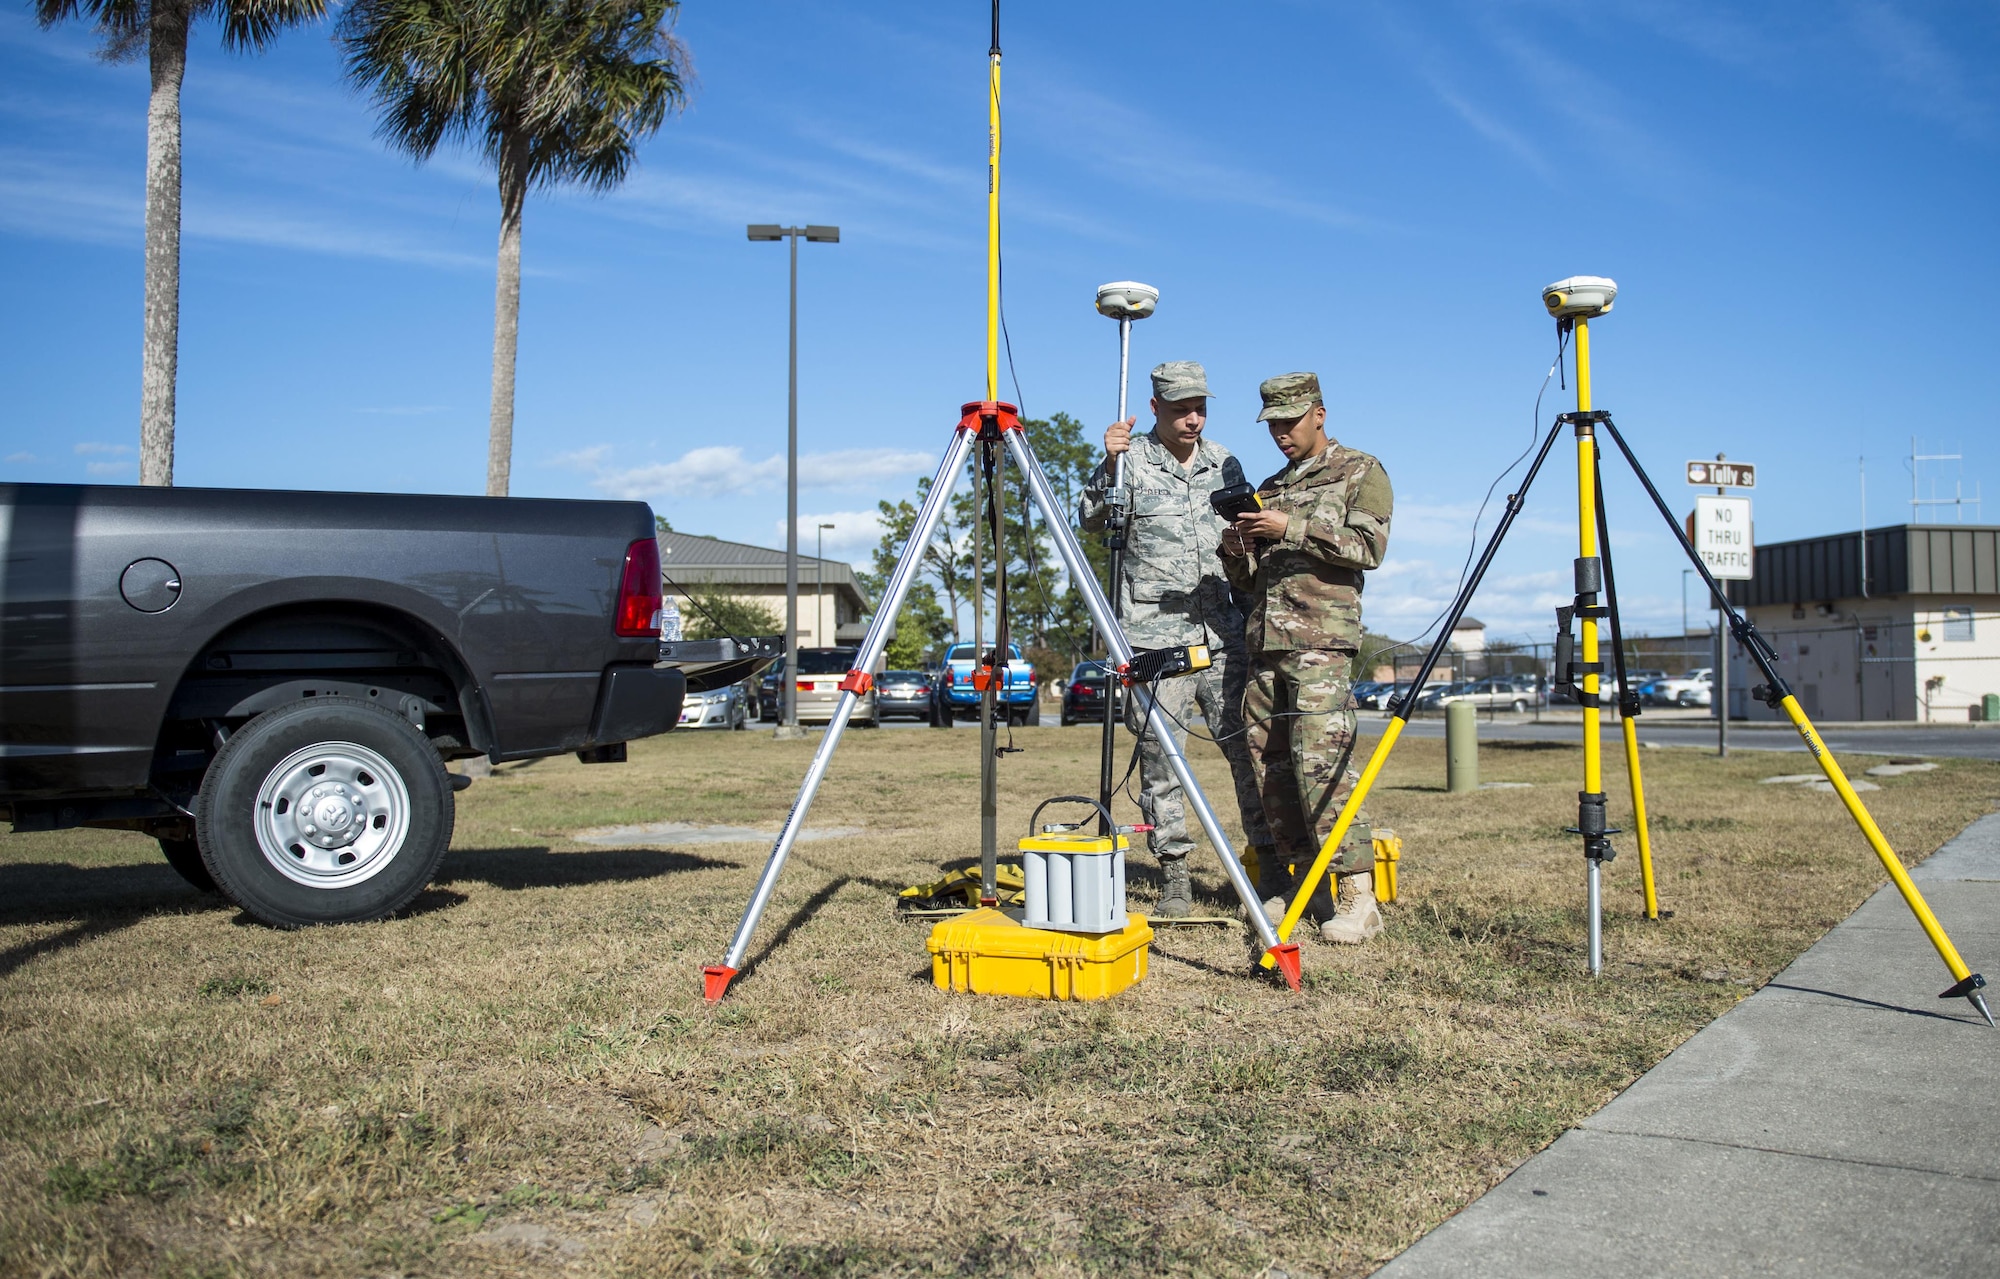 Senior Airmen Giann Recapuna and Adam Gleason, engineering specialists with the 1st Special Operations Civil Engineer Squadron, set up a GPS to survey and verify the location and elevation of facilities at Hurlburt Field, Fla., Nov. 7, 2016. Engineering specialists use surveys to collect input data for the installation geobase database and typography to assist engineering designs for new structures. (U.S. Air Force photo by Airman 1st Class Isaac O. Guest IV)